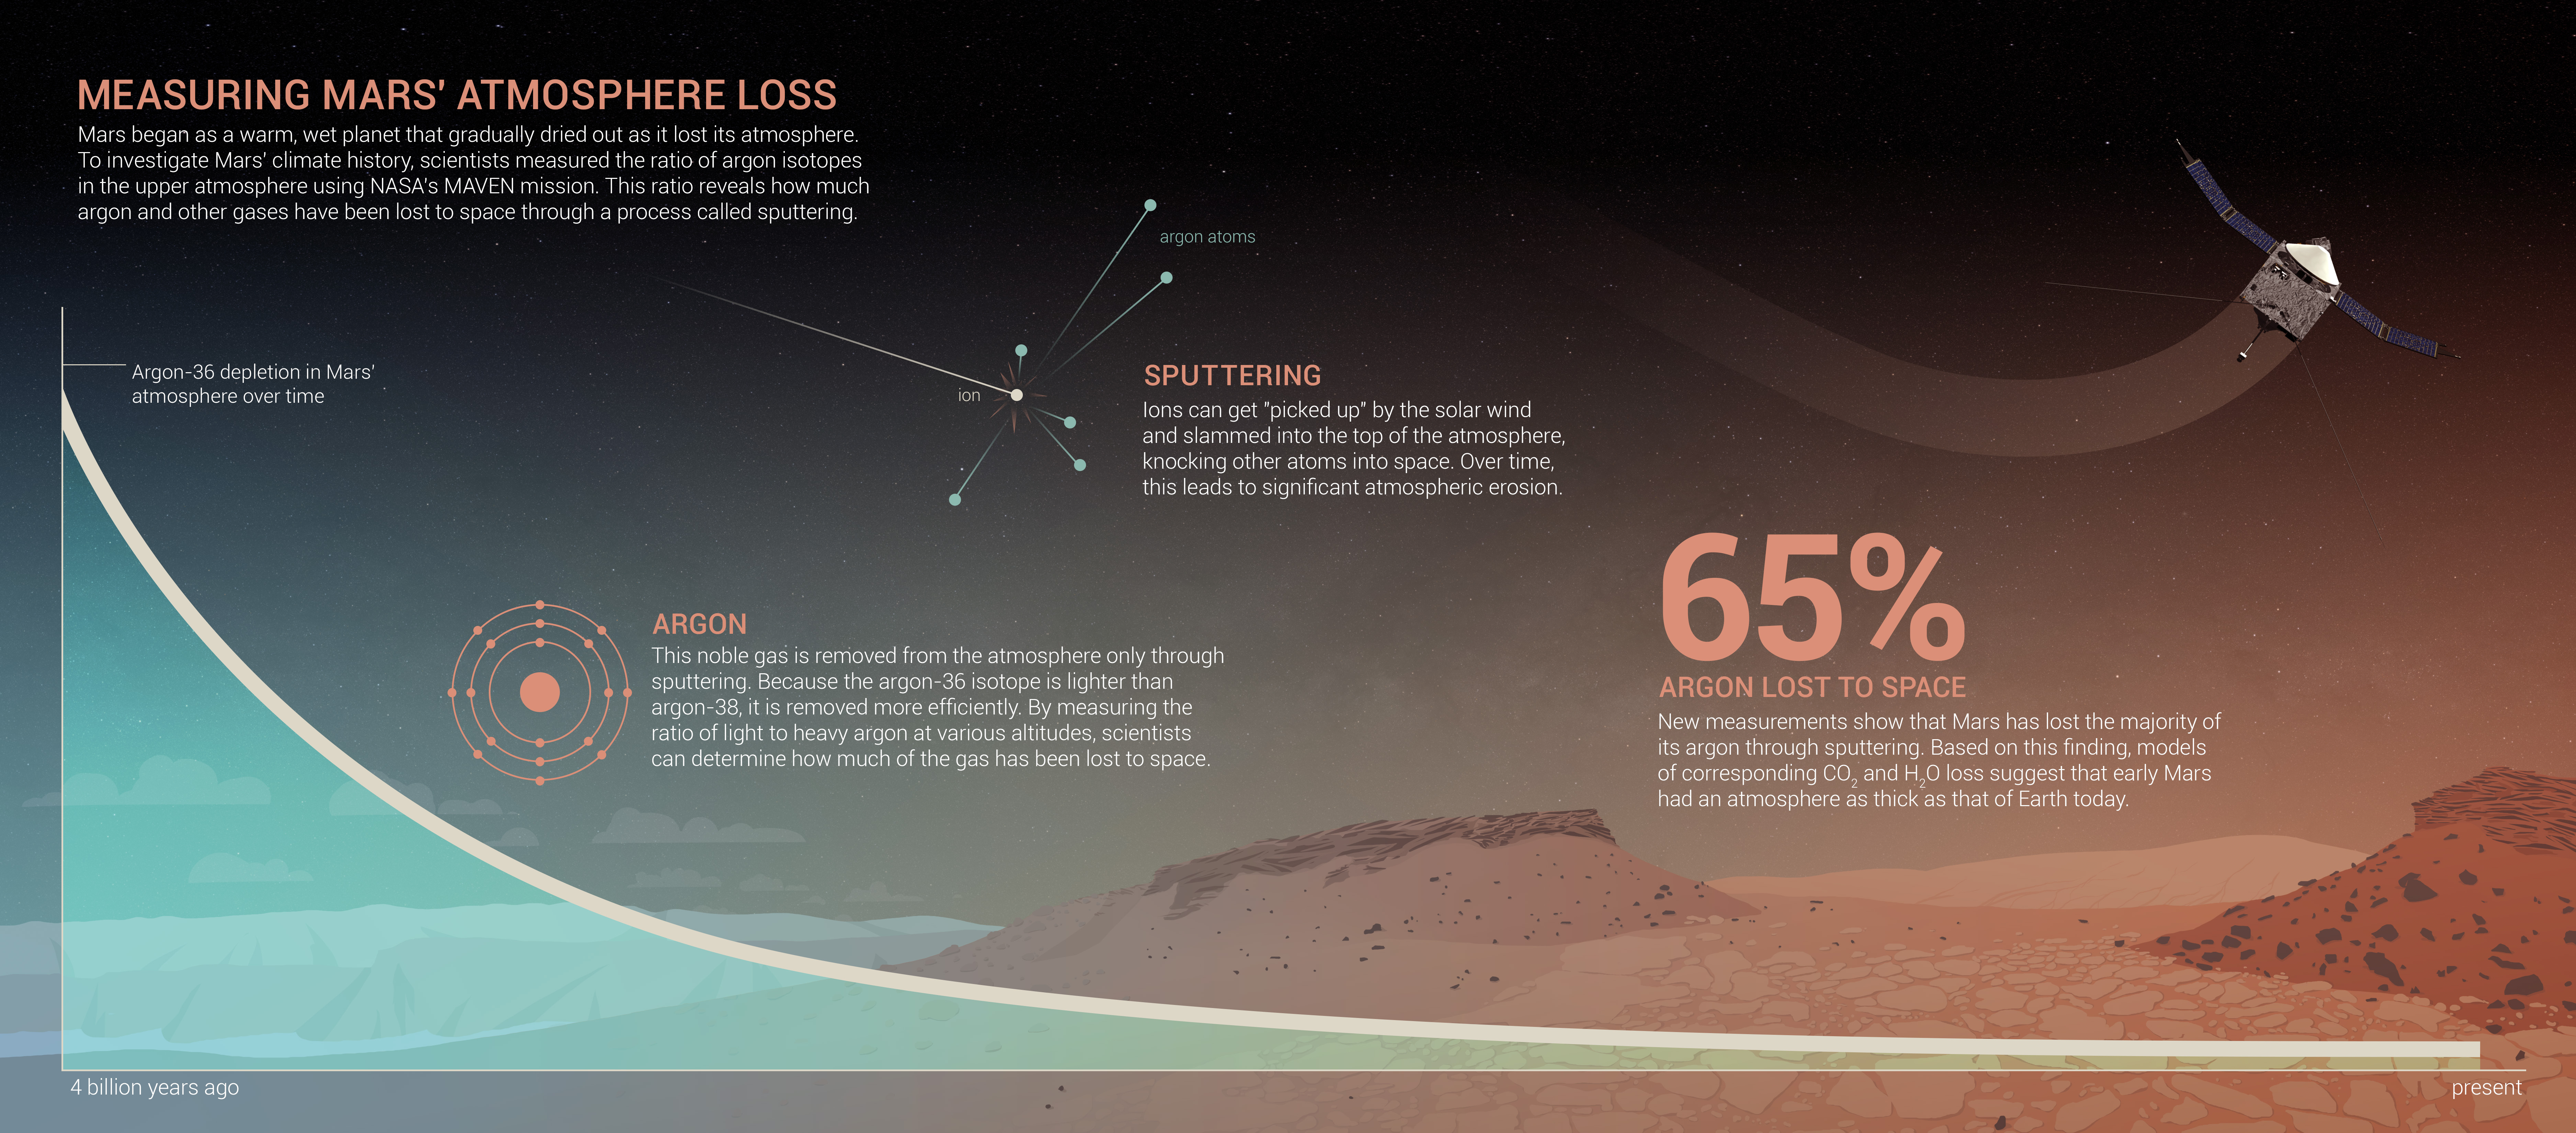 This poster made by NASA shows the different ways that Mars lost most of its atmosphere after its magnetic field disappeared.